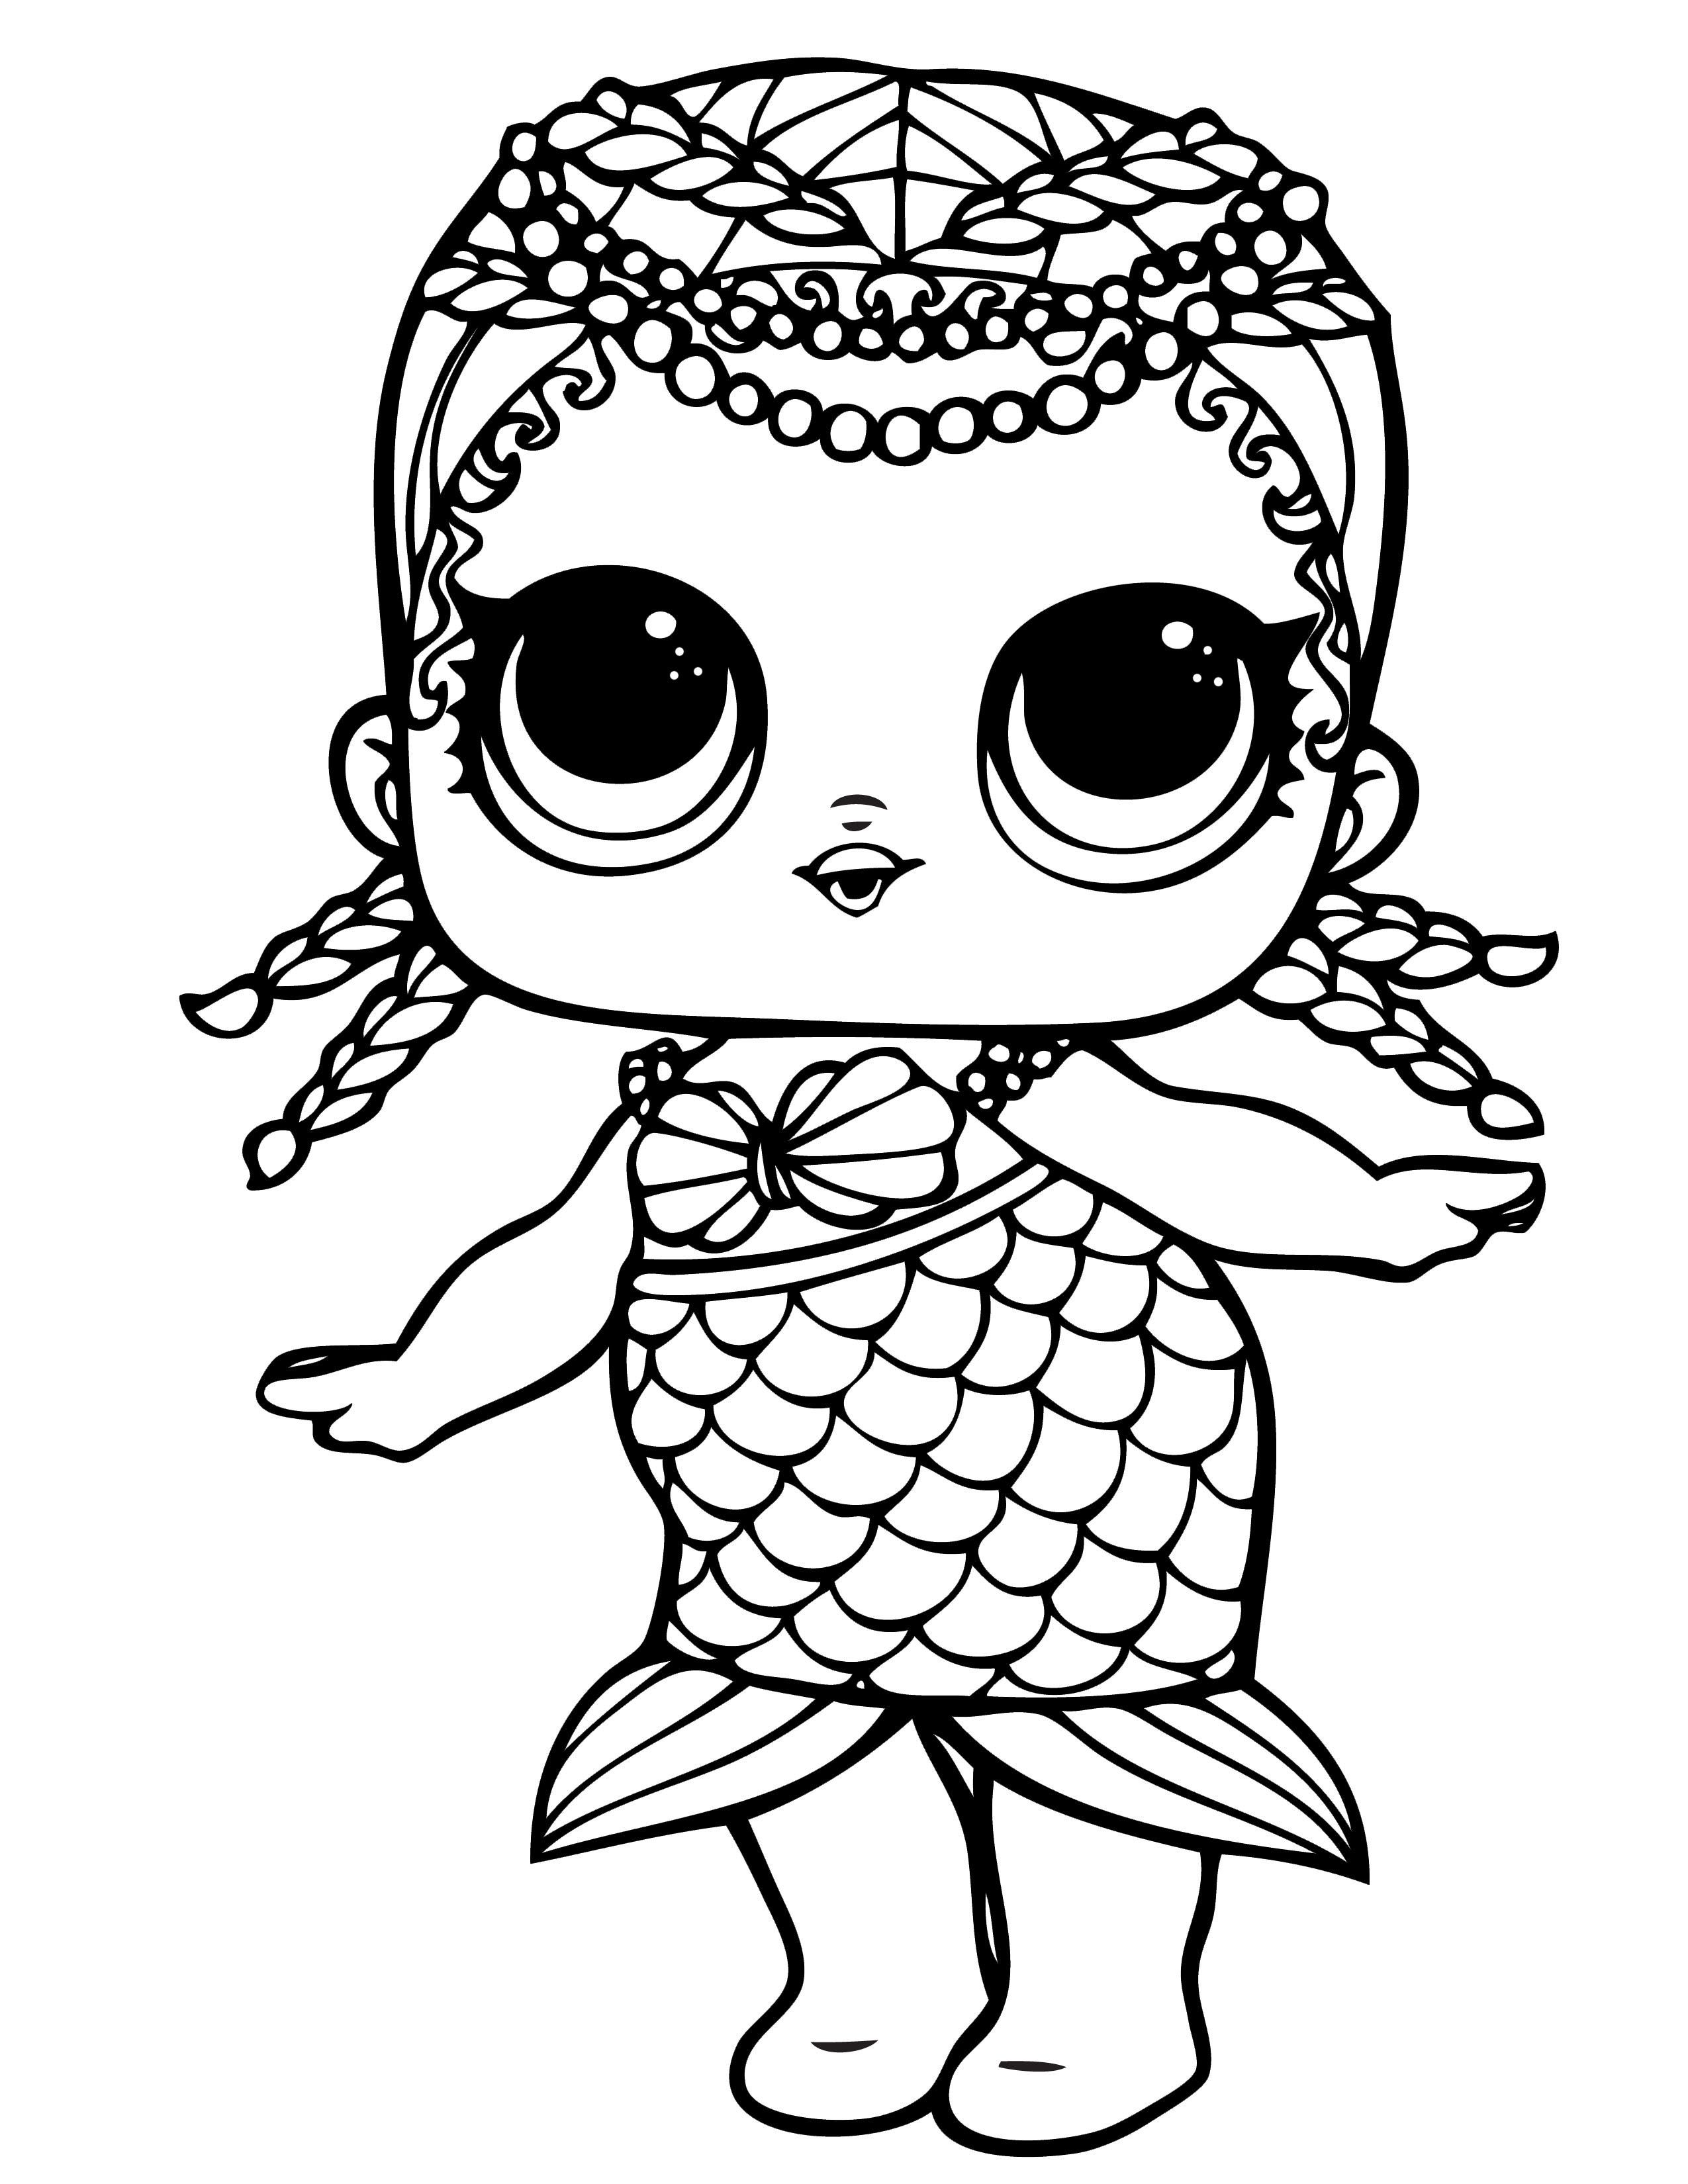 Lol Fish Coloring Page